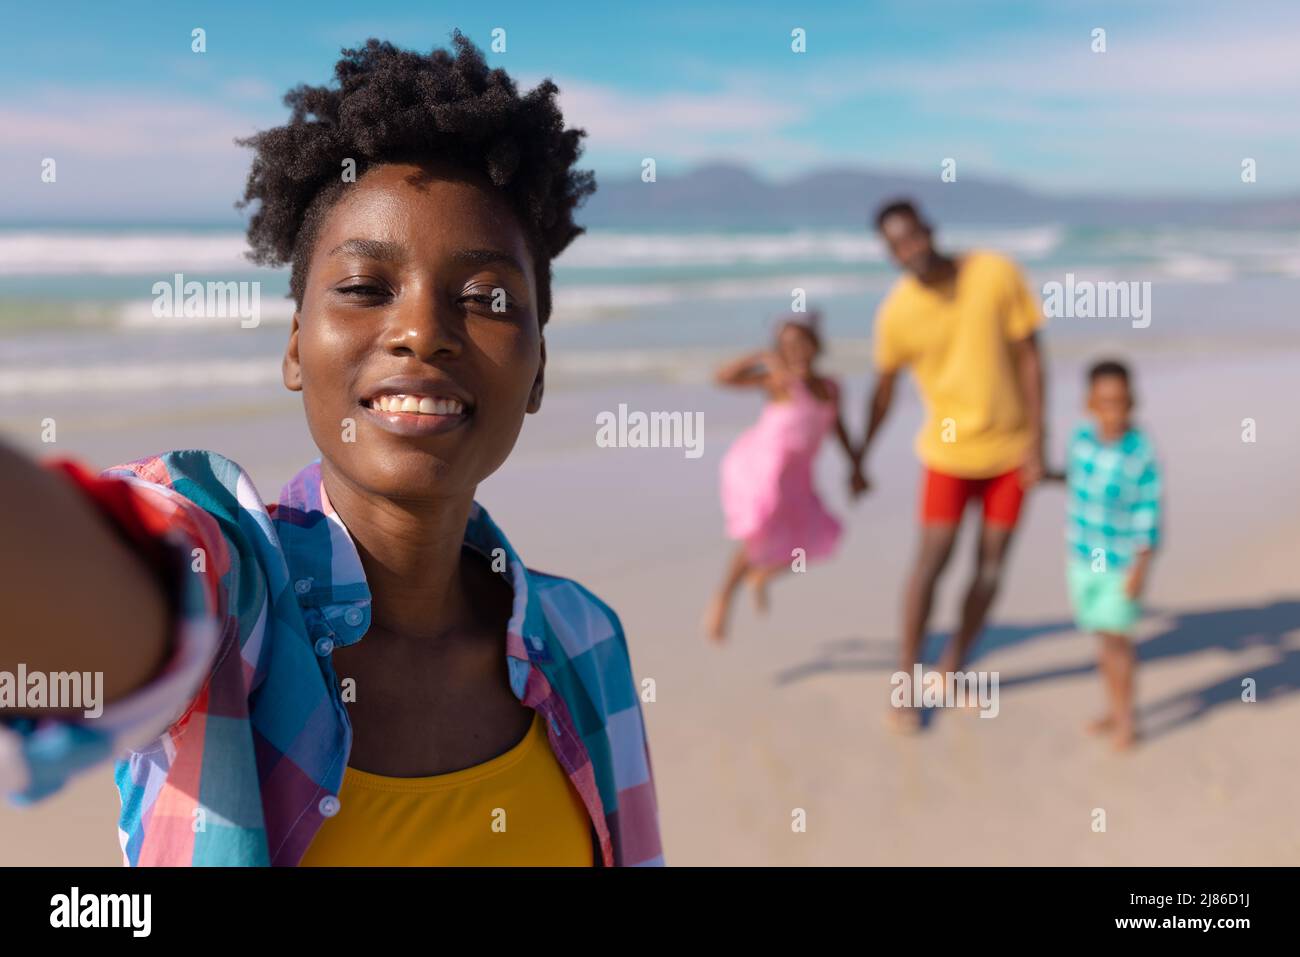 Portrait of smiling african american young woman with son, daughter and man in background at beach Stock Photo